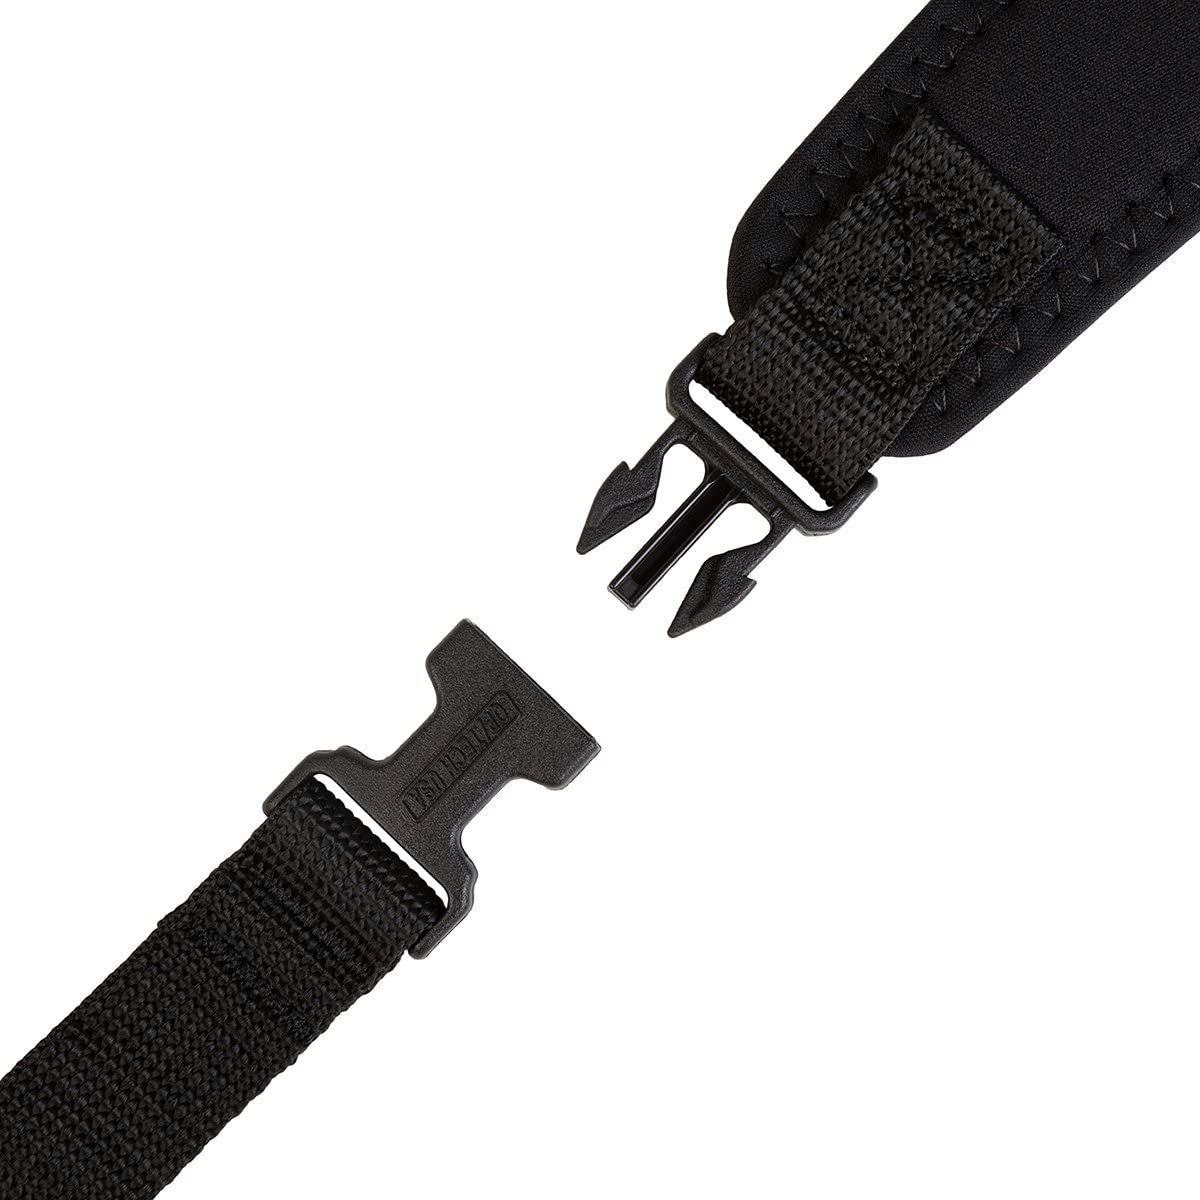 OP/TECH Utility Strap Sling for Cameras and Binoculars - Black